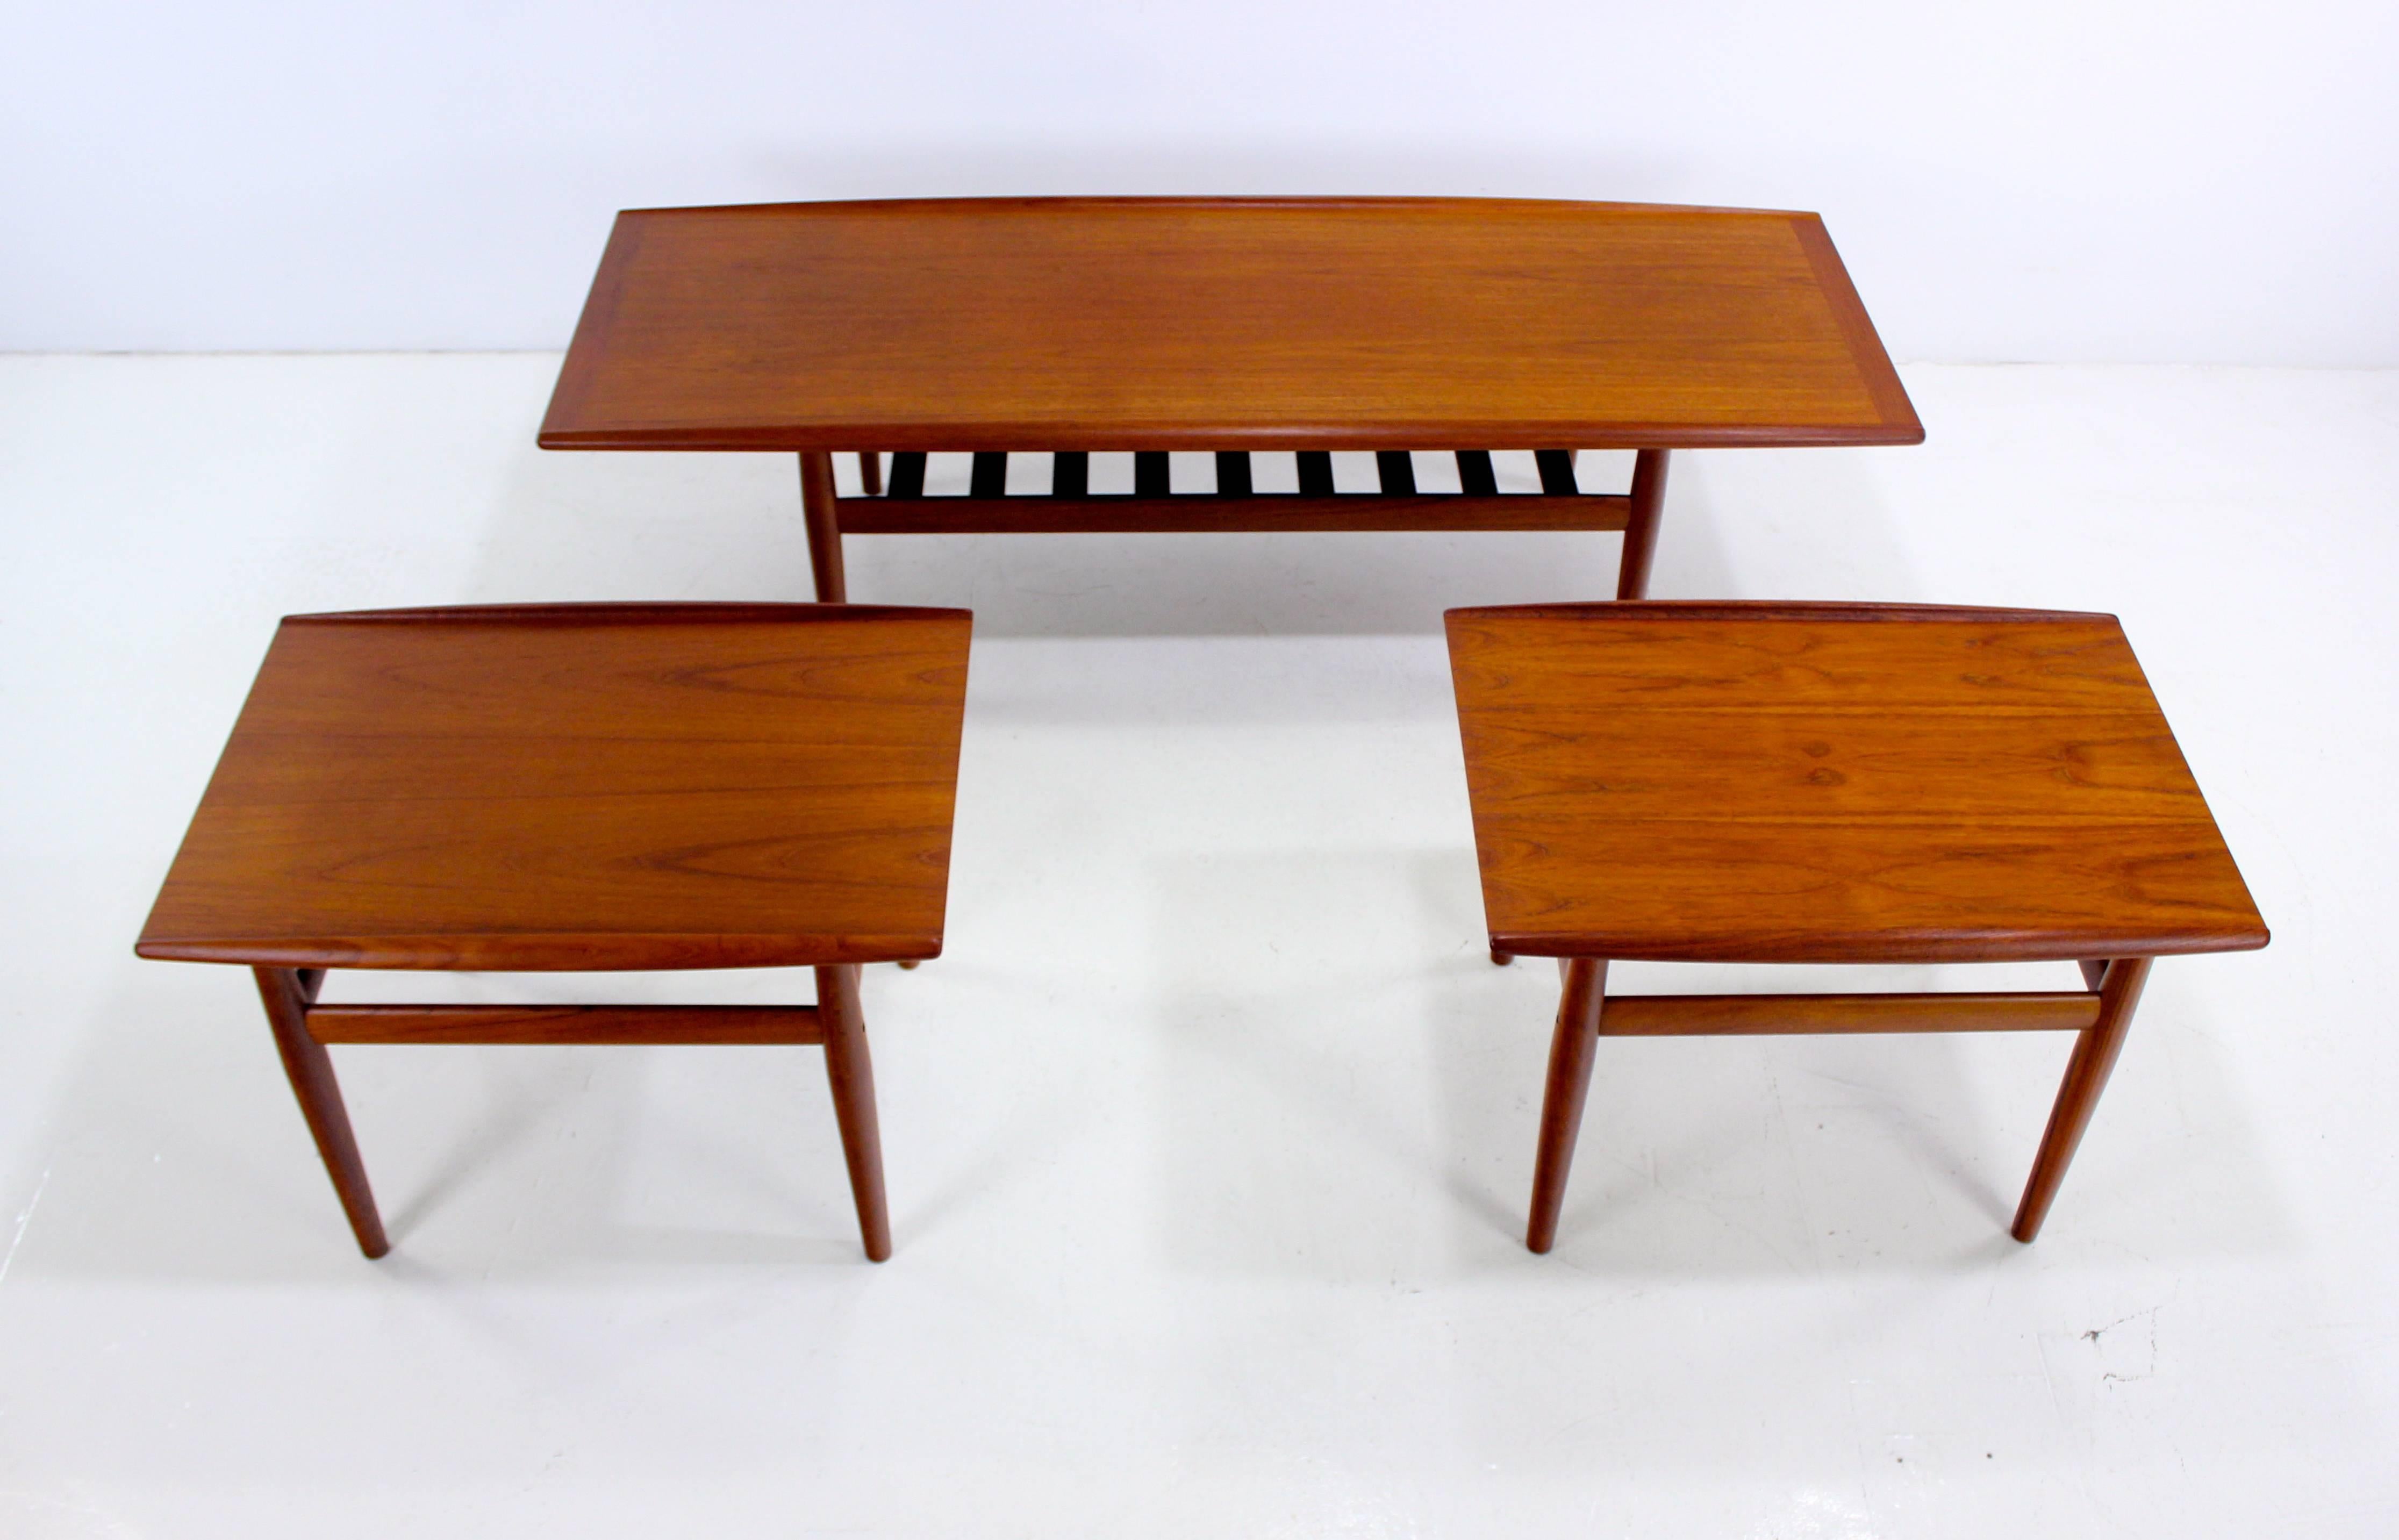 Three Danish modern tables designed by Grete Jalk.
Solid teak.
One coffee table with slated magazine shelf.
Two side tables measure 27.5" W x 19.75" D x 19" H.
Matchless quality and price.
Low freight and quick ship.
    